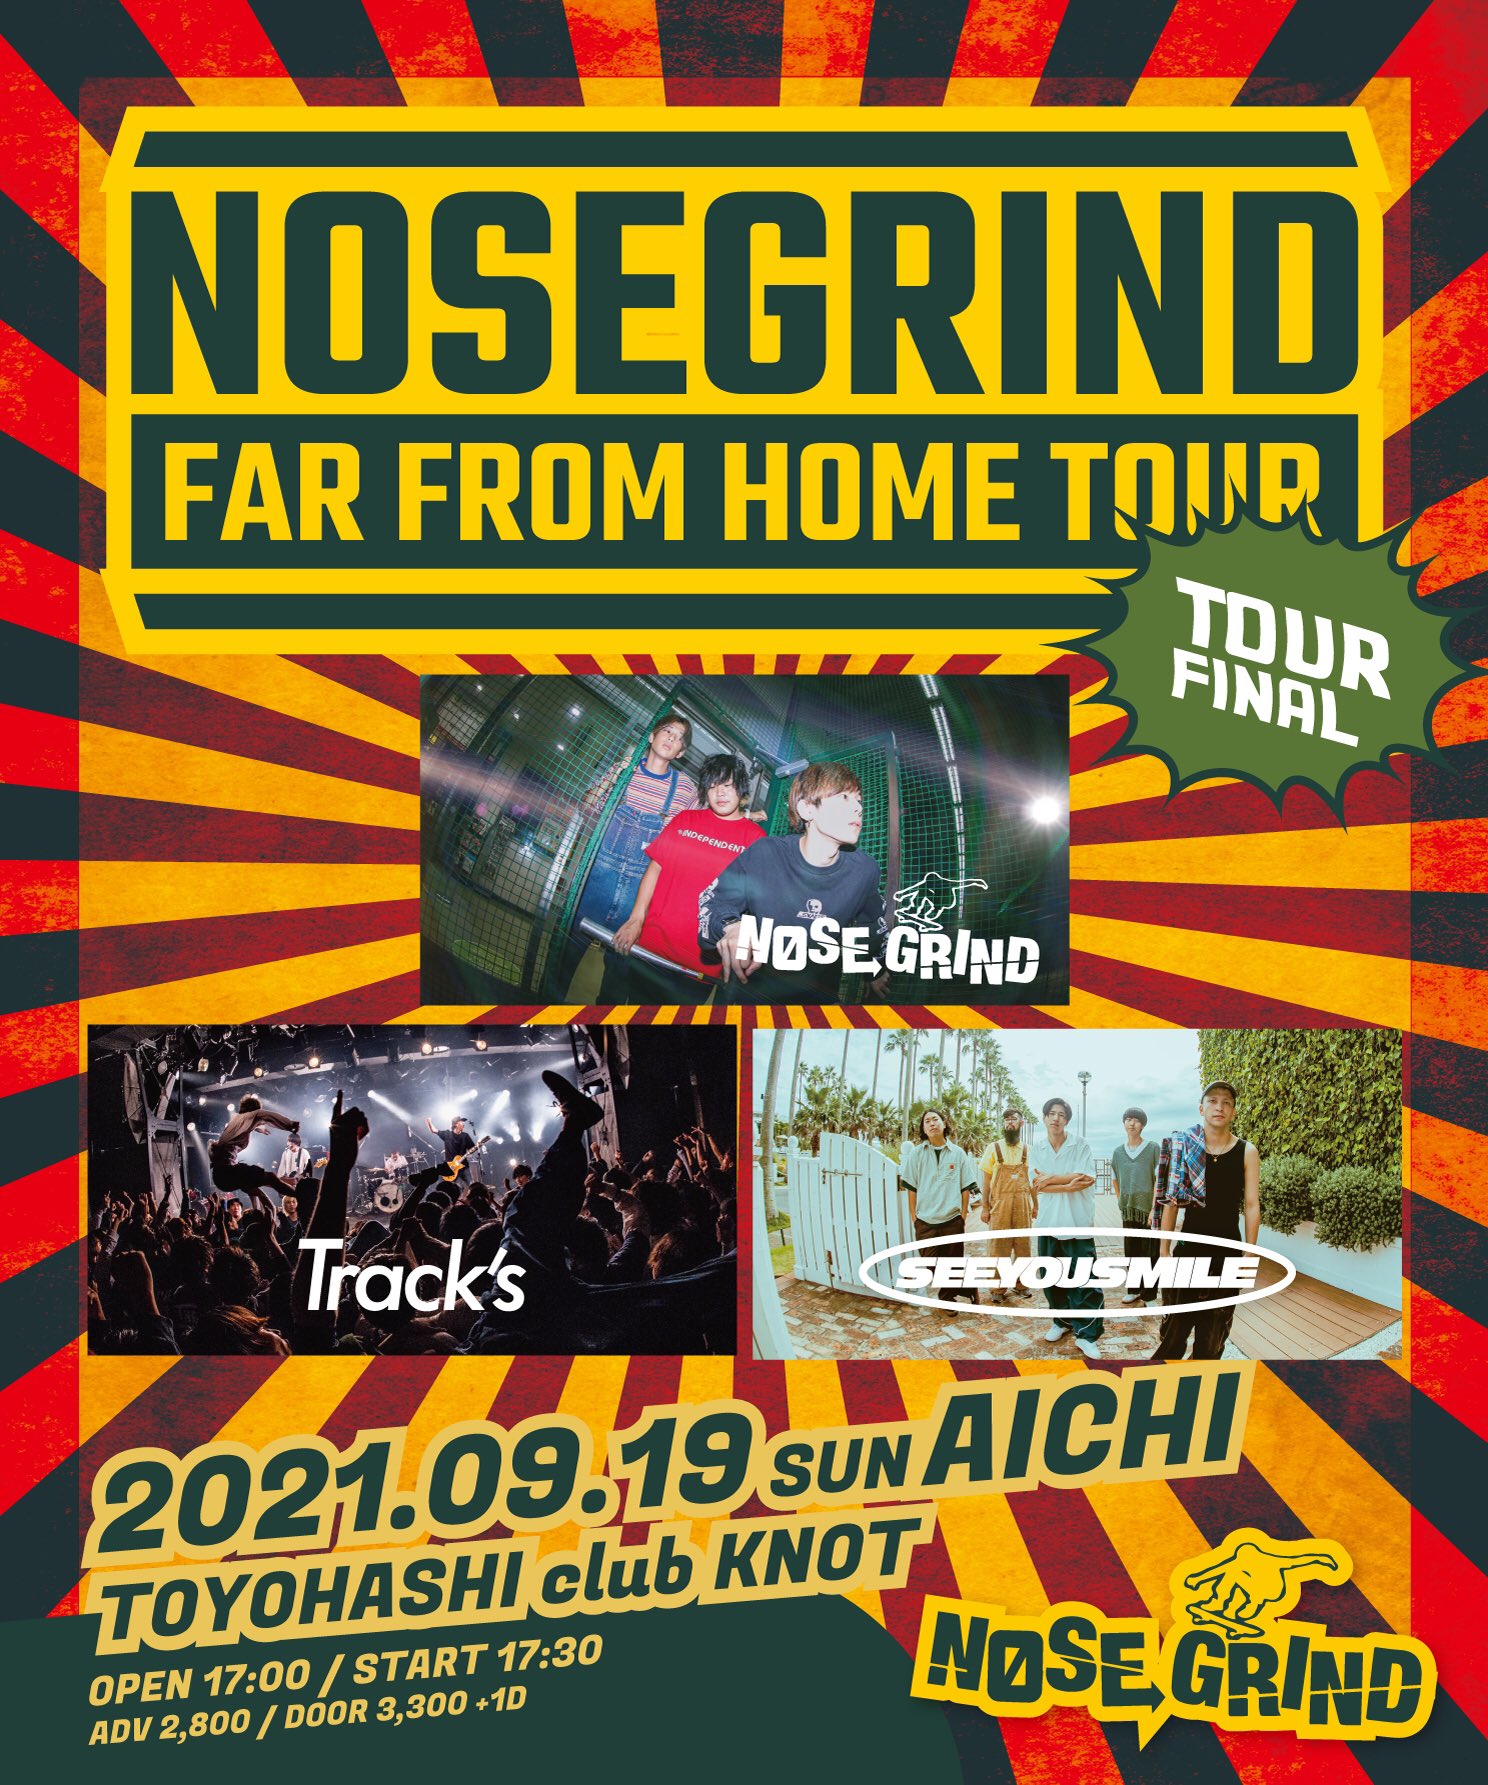 NOSE GRIND presents Far from Home TOUR FINAL